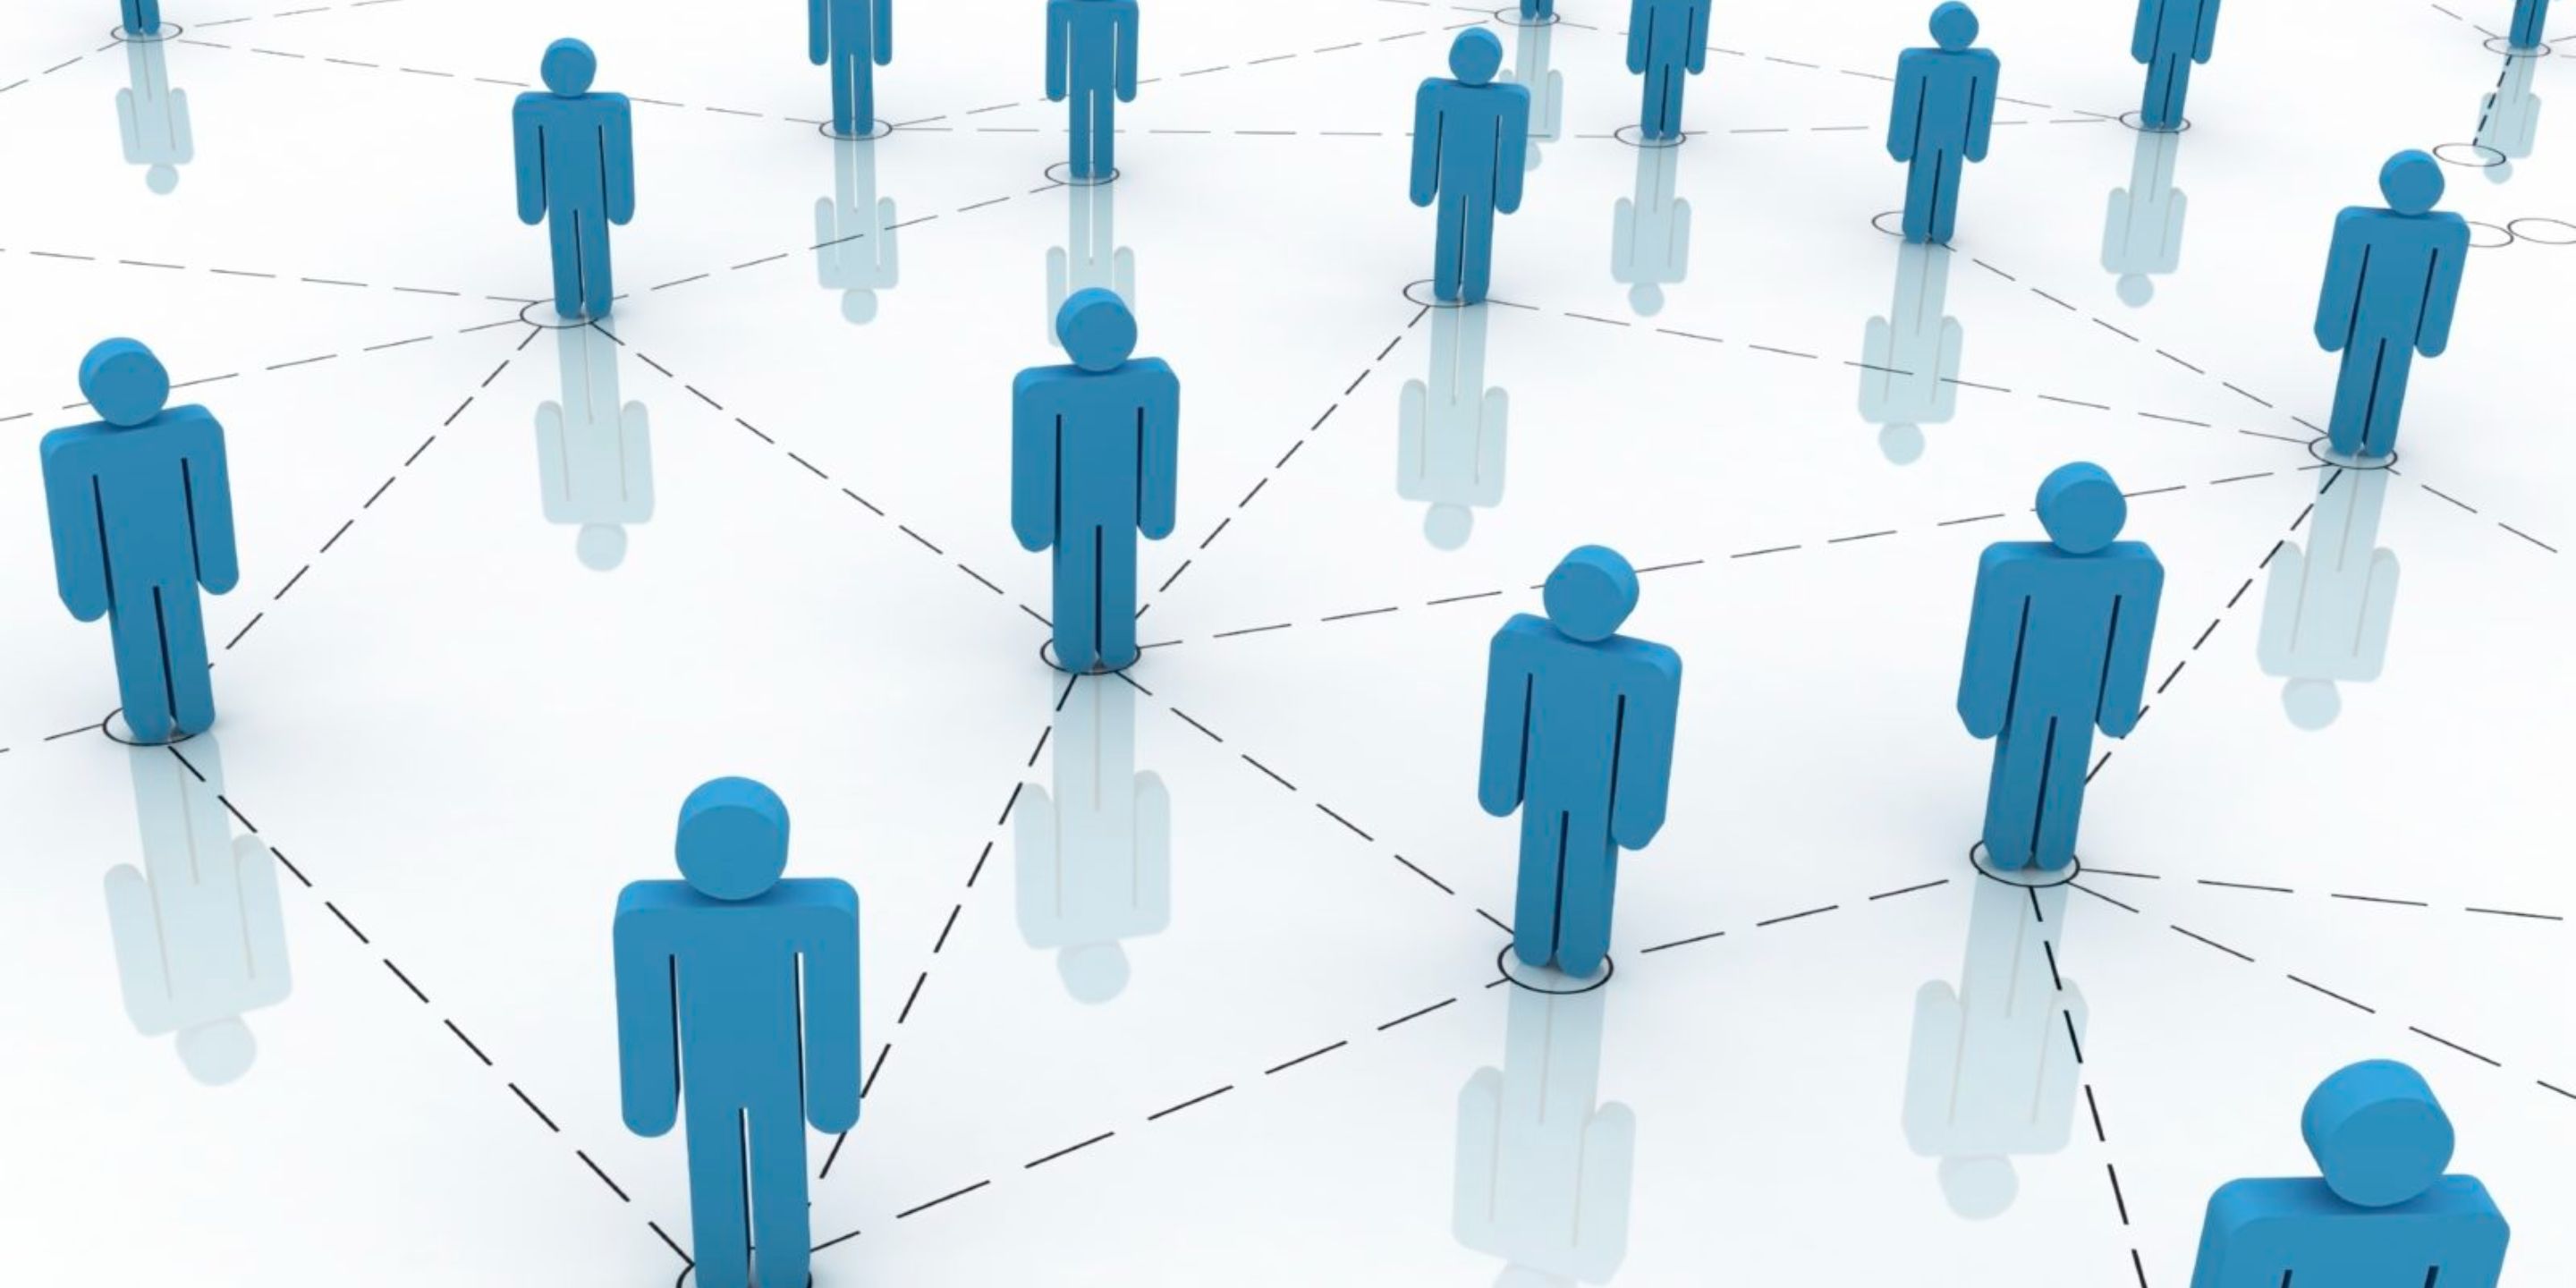 HC Group (insights): why candidate referencing and networking matters for job applications